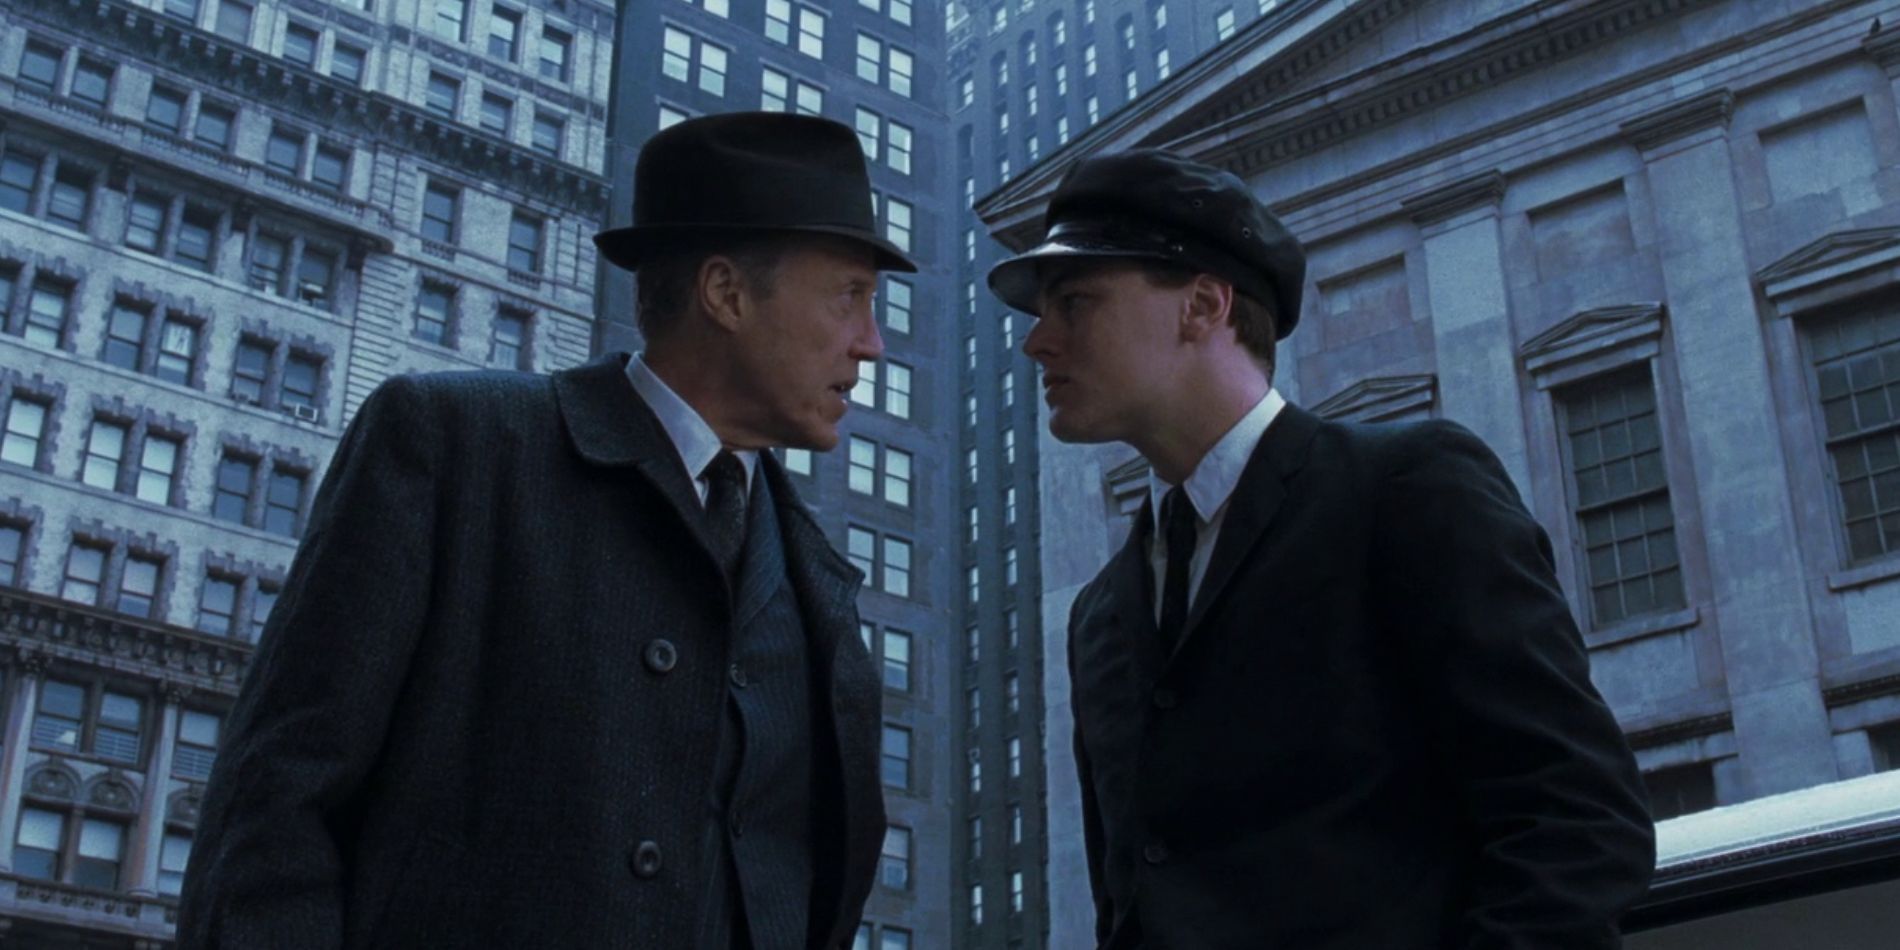 The Truth About Frank's Dad In Catch Me If You Can